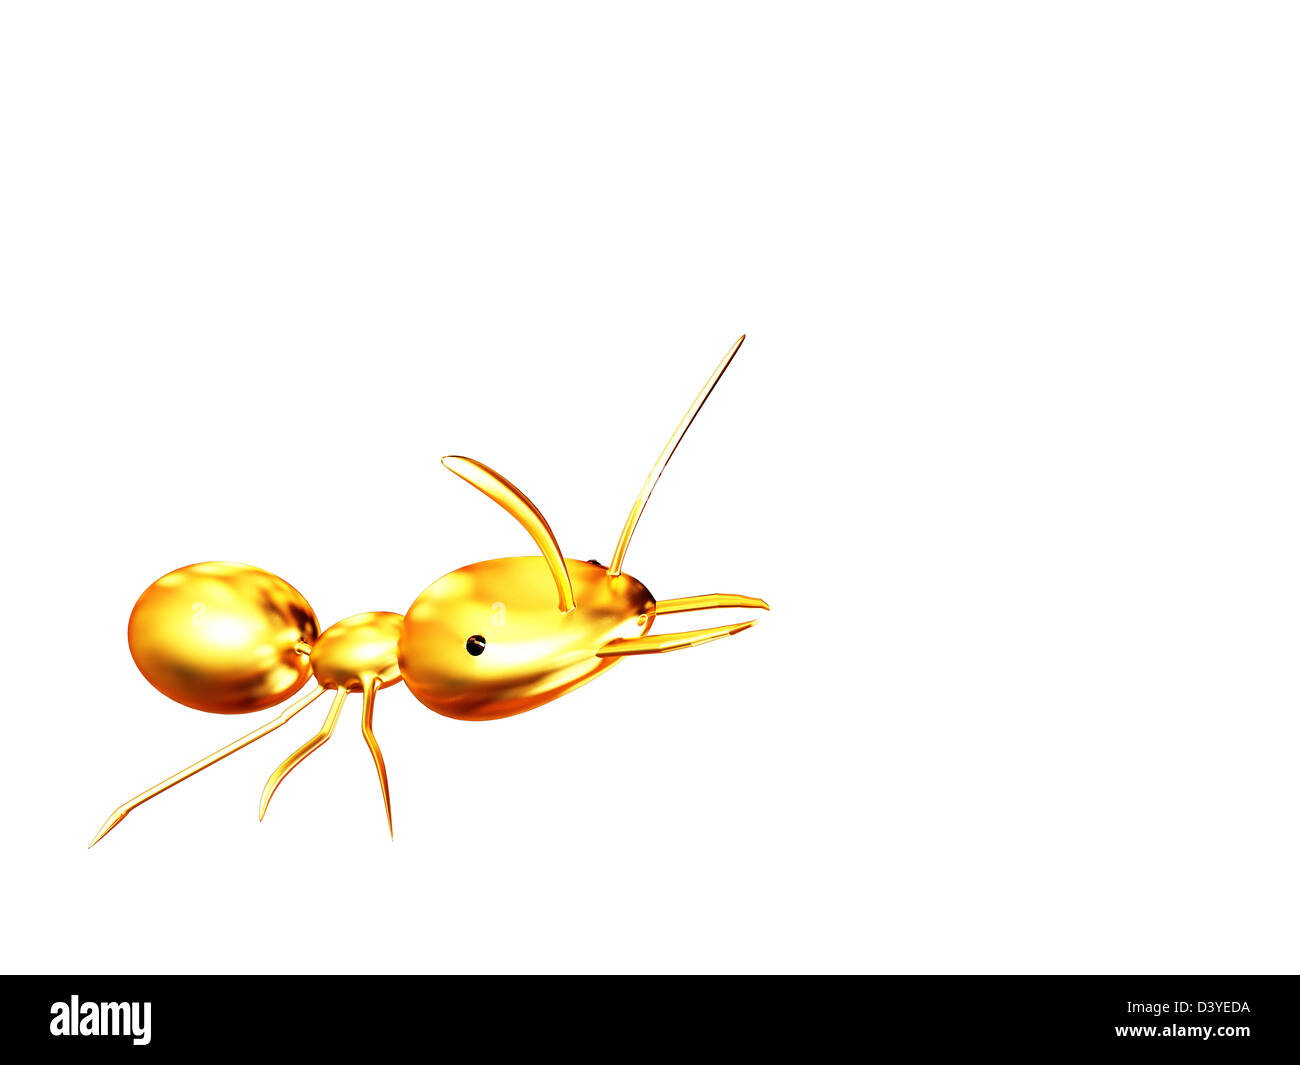 golden ant for adv or others purpose use Stock Photo